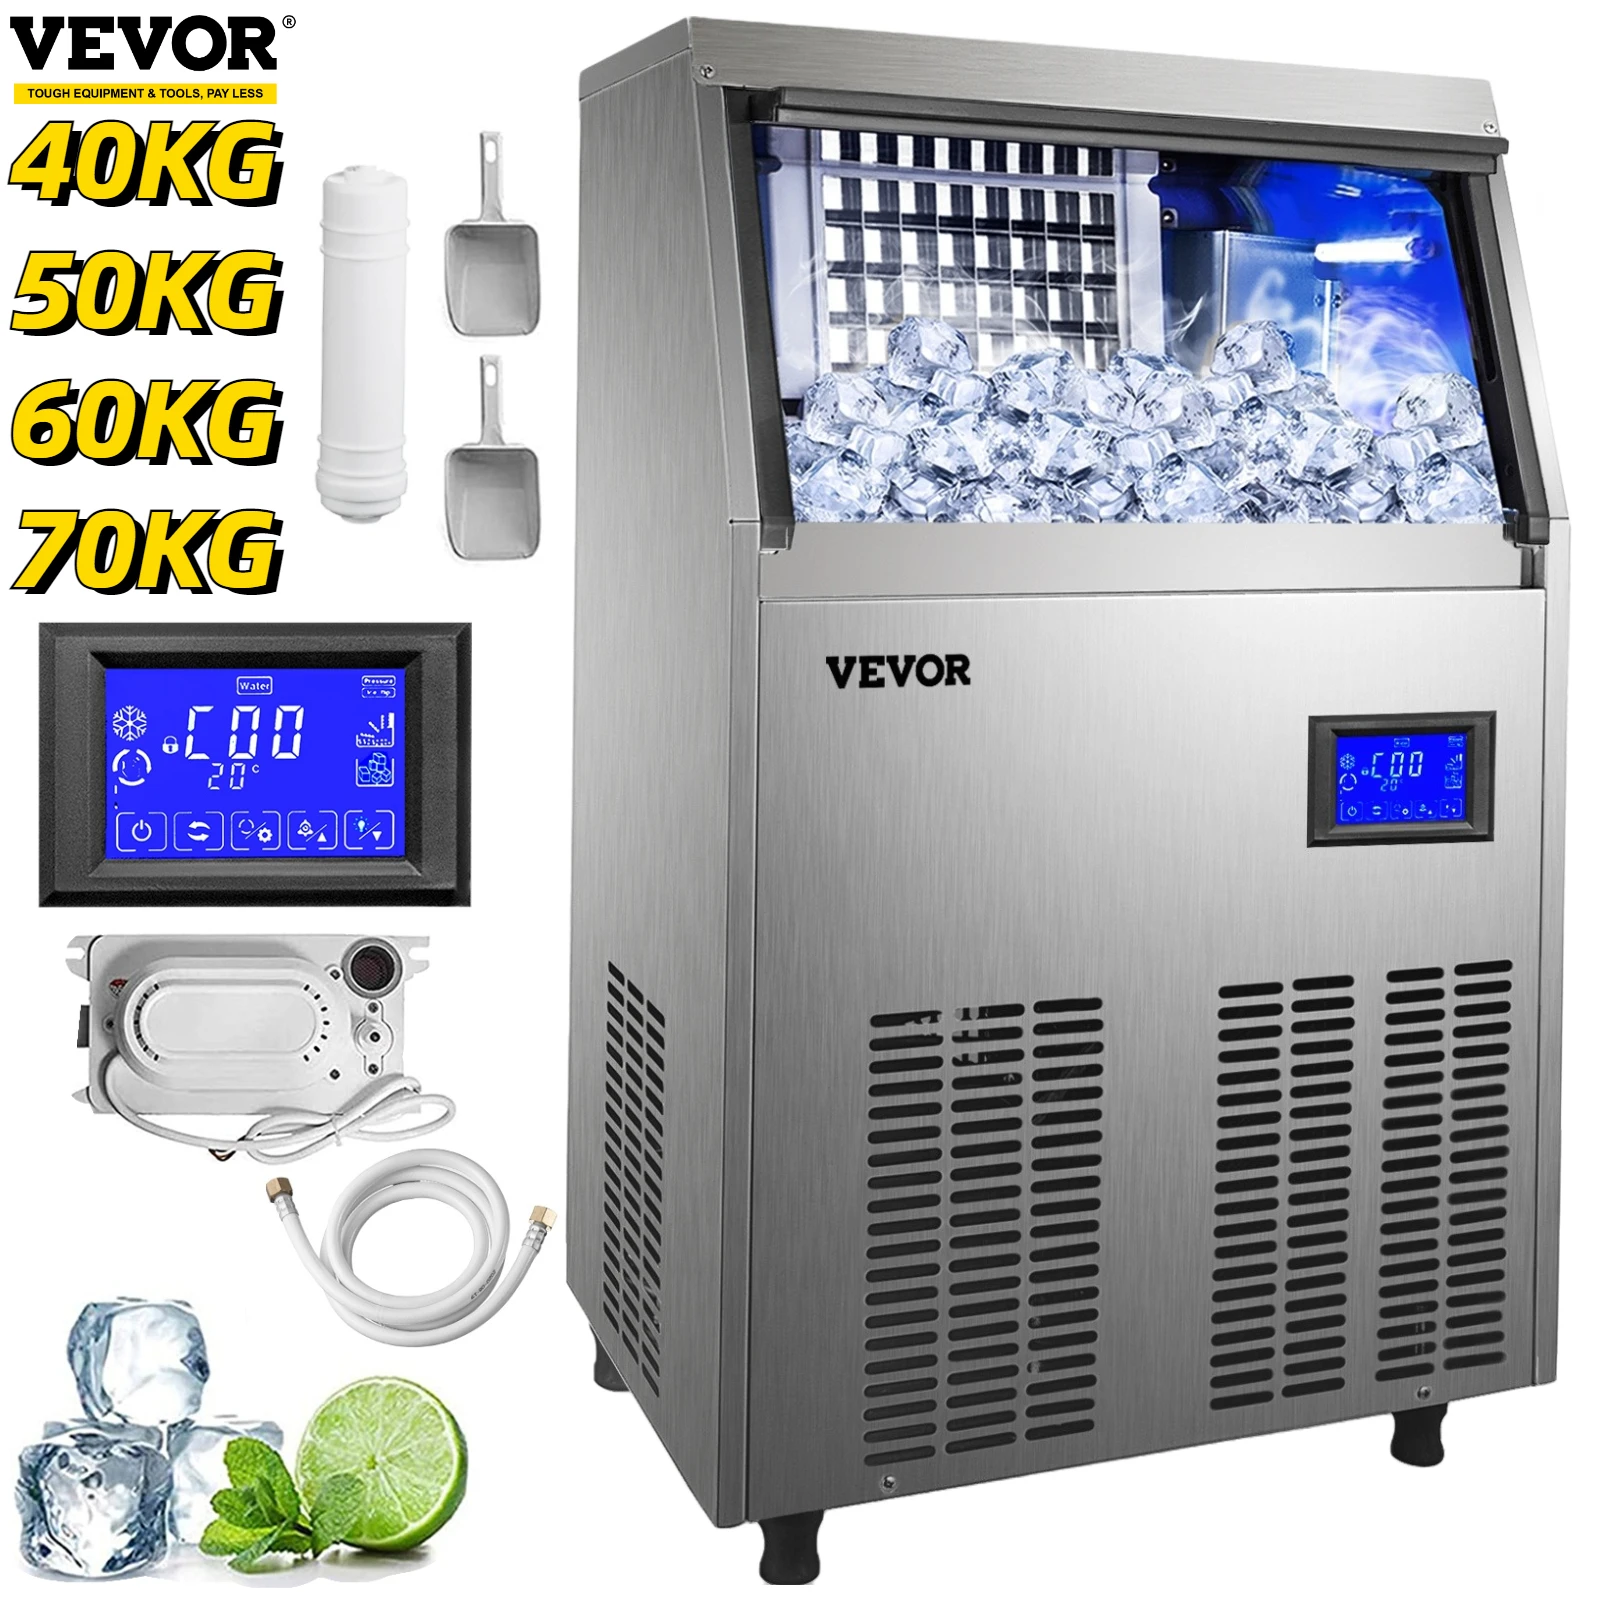 

VEVOR Commercial Cube Ice Maker with Water Drain Pump 40/50/60/70 KG/24H Freestanding Auto Clean Liquid Freezer Home Appliance